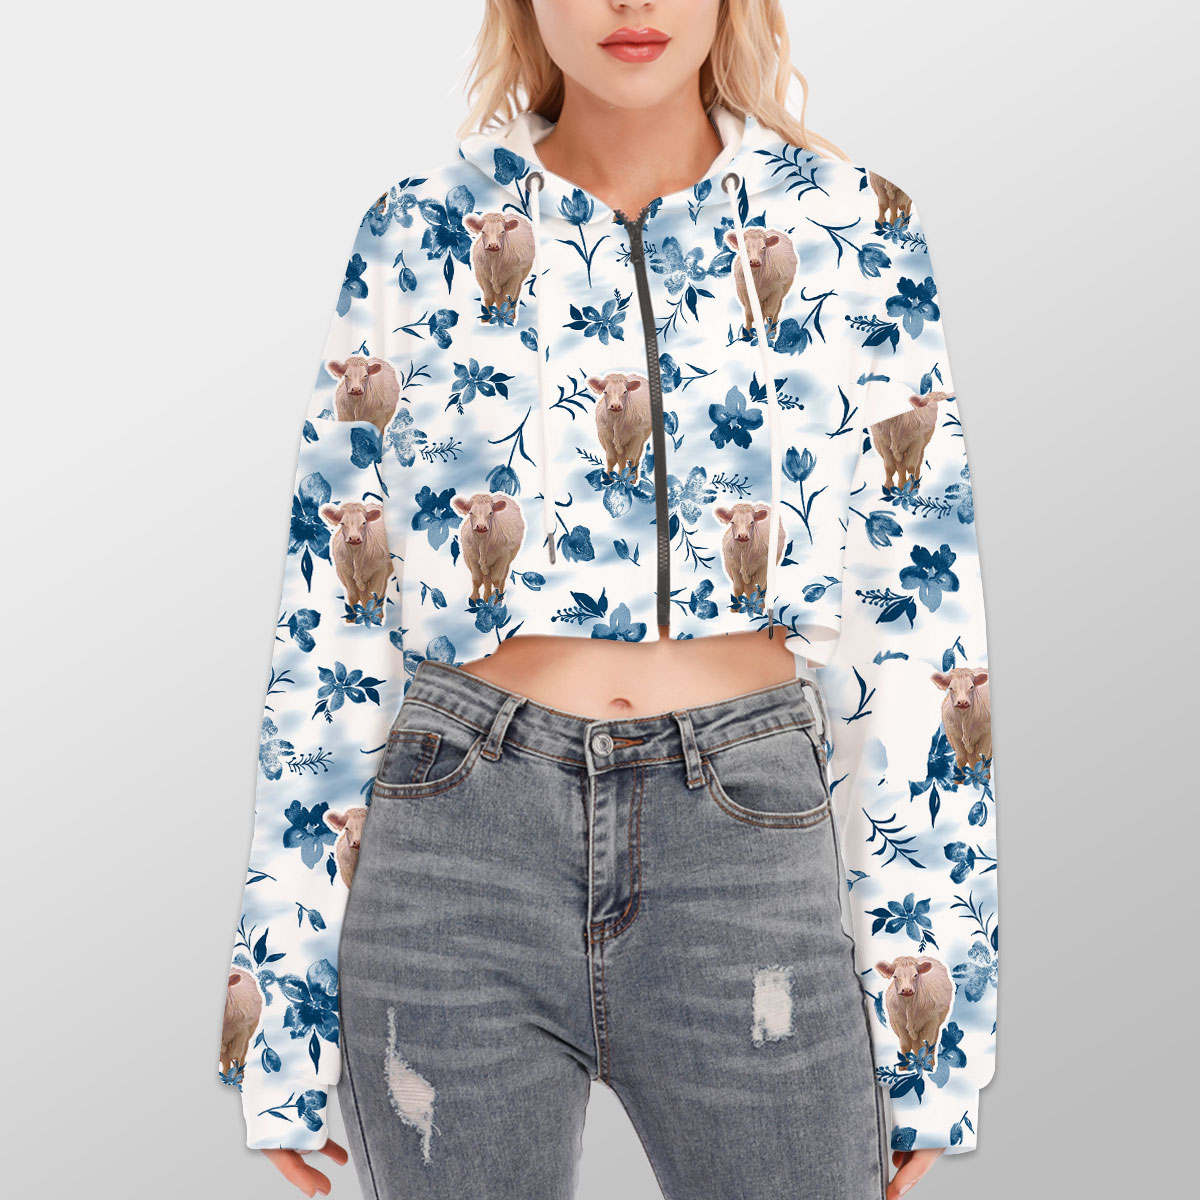 Charolais Watercolor Flowers and Leaves Tie Dye Pattern Hoodie With Zipper Closure